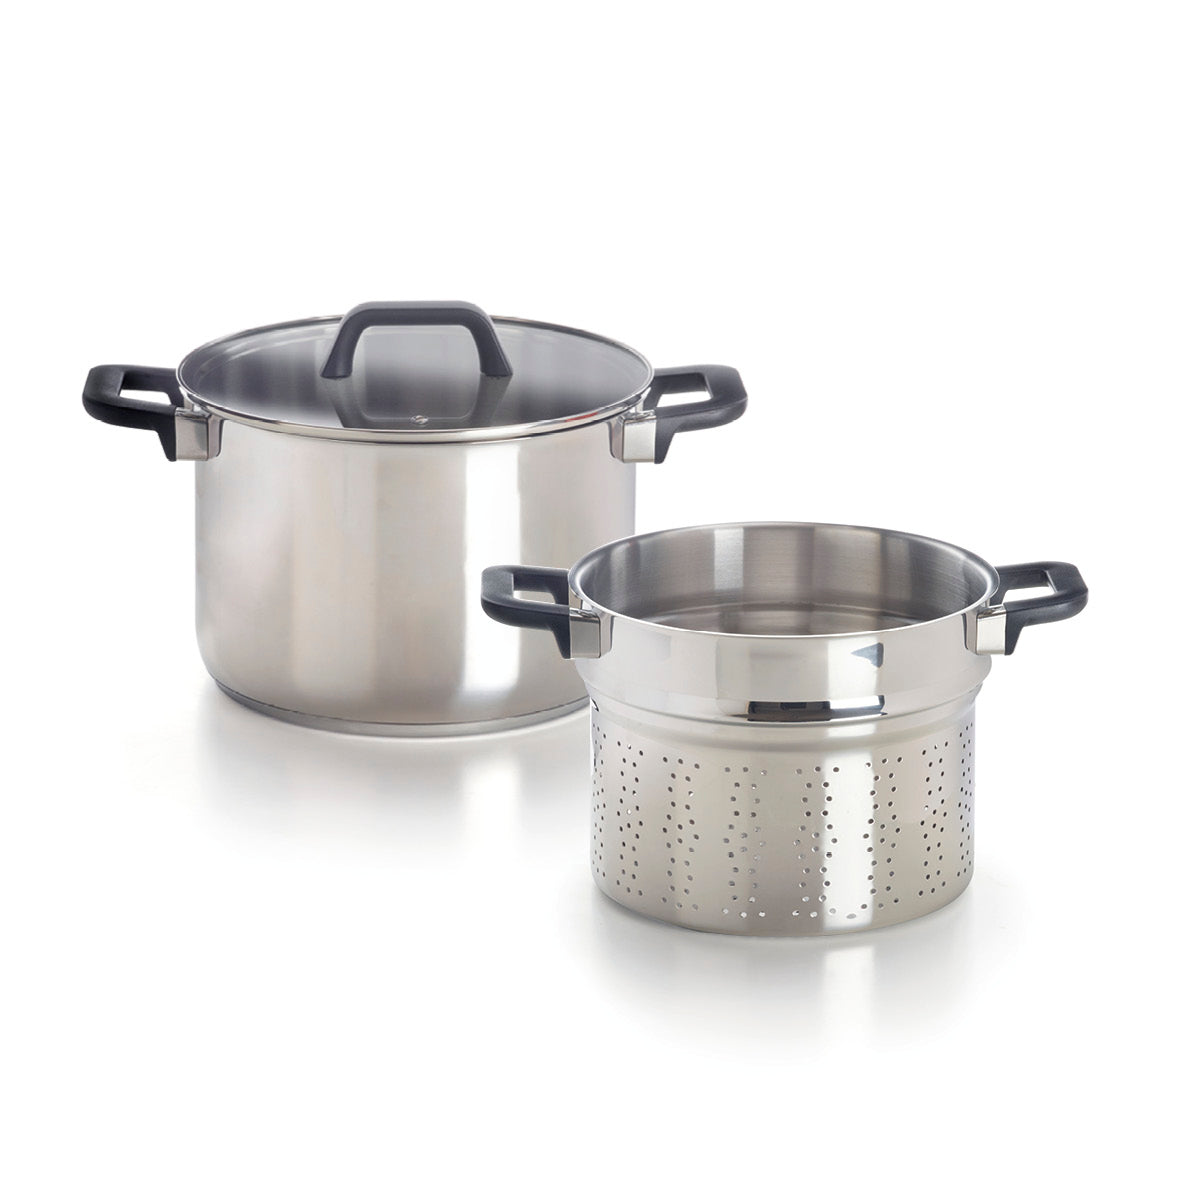 Pasta pot with insert - Triple Bottom - Stainless steel - with lid - Silver